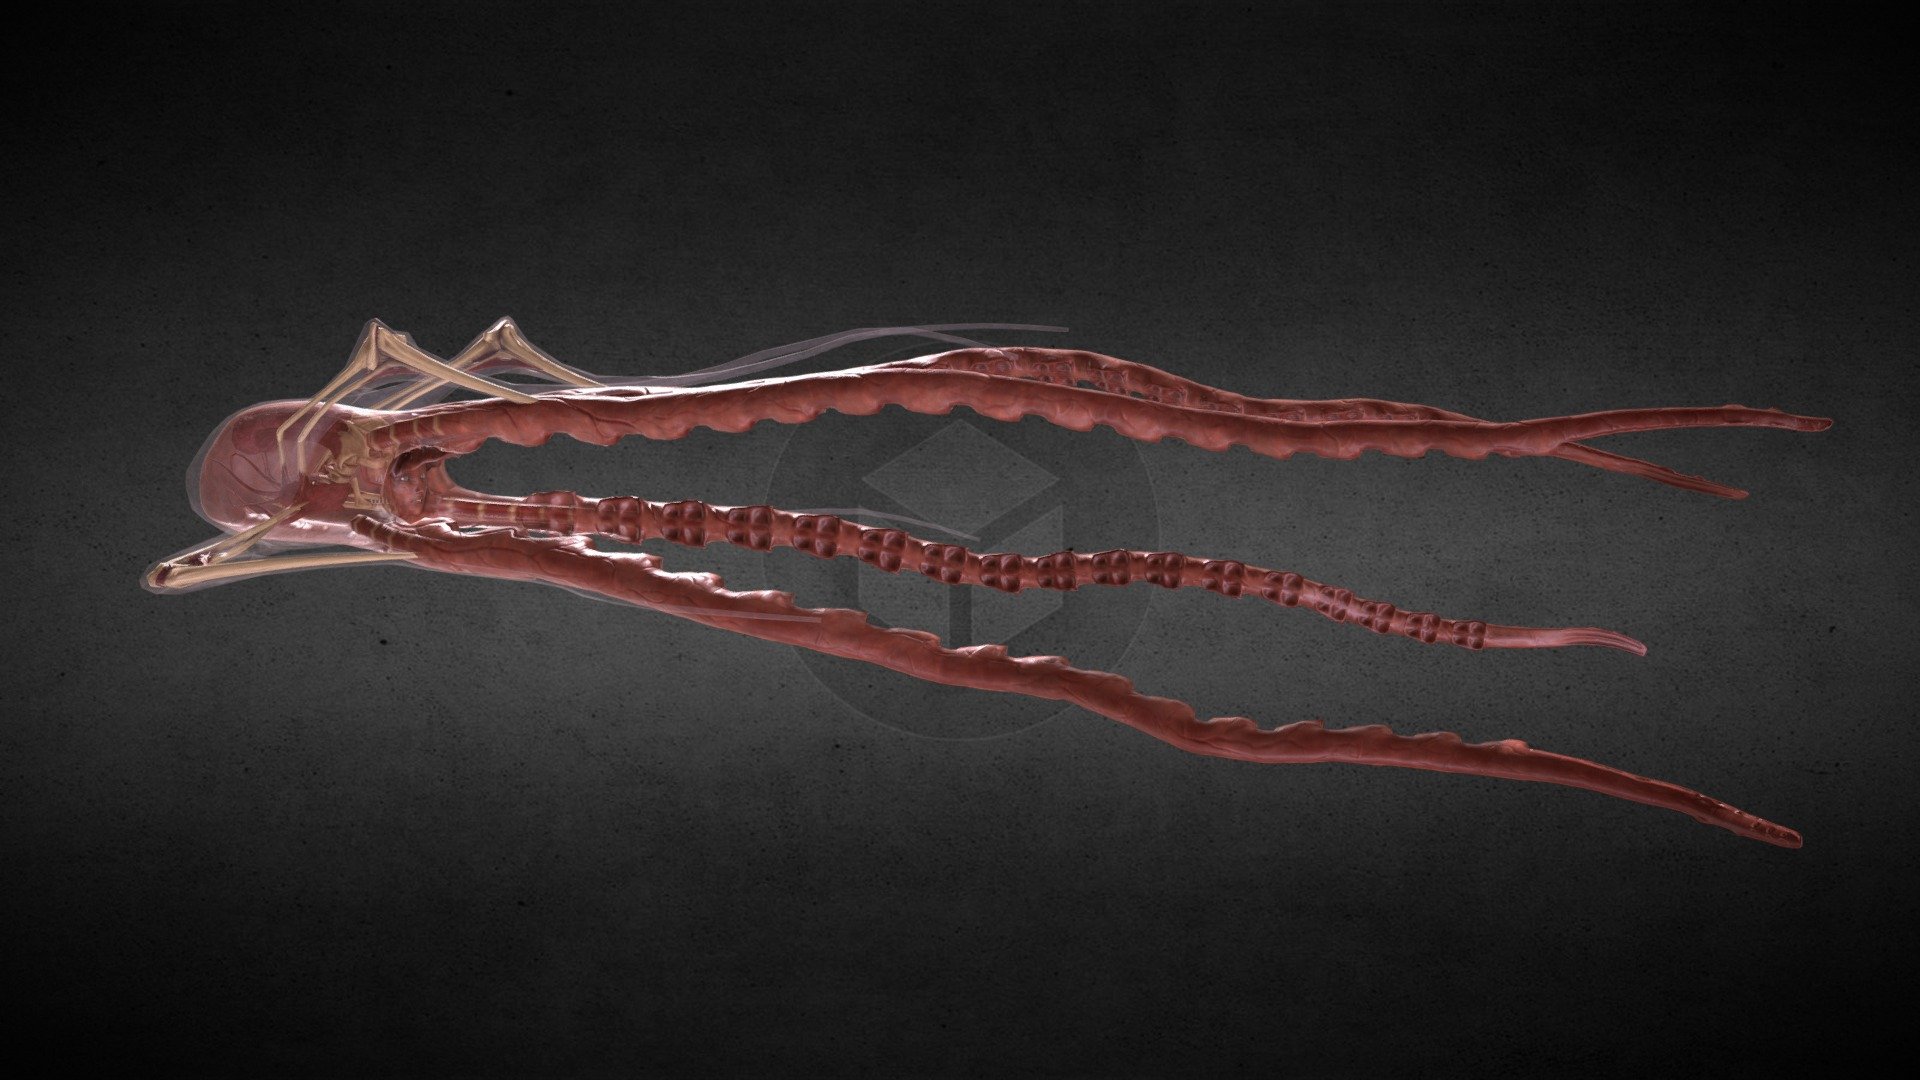 Xyanide resurrection squid animated model. Concept art by Robin Keizer with all rights reserved. 

This model contains 3 materials at 2k resolution, and just over 200 bones 3d model